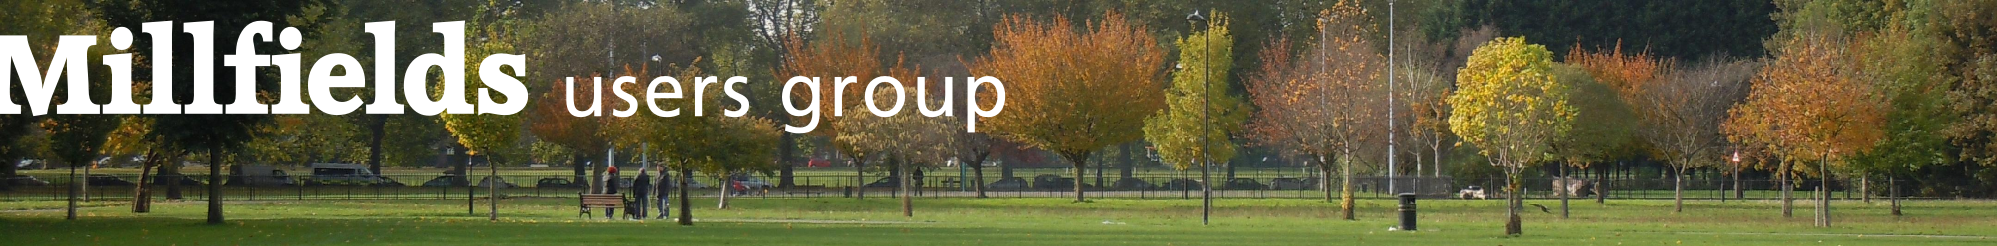 Millfields Users Group